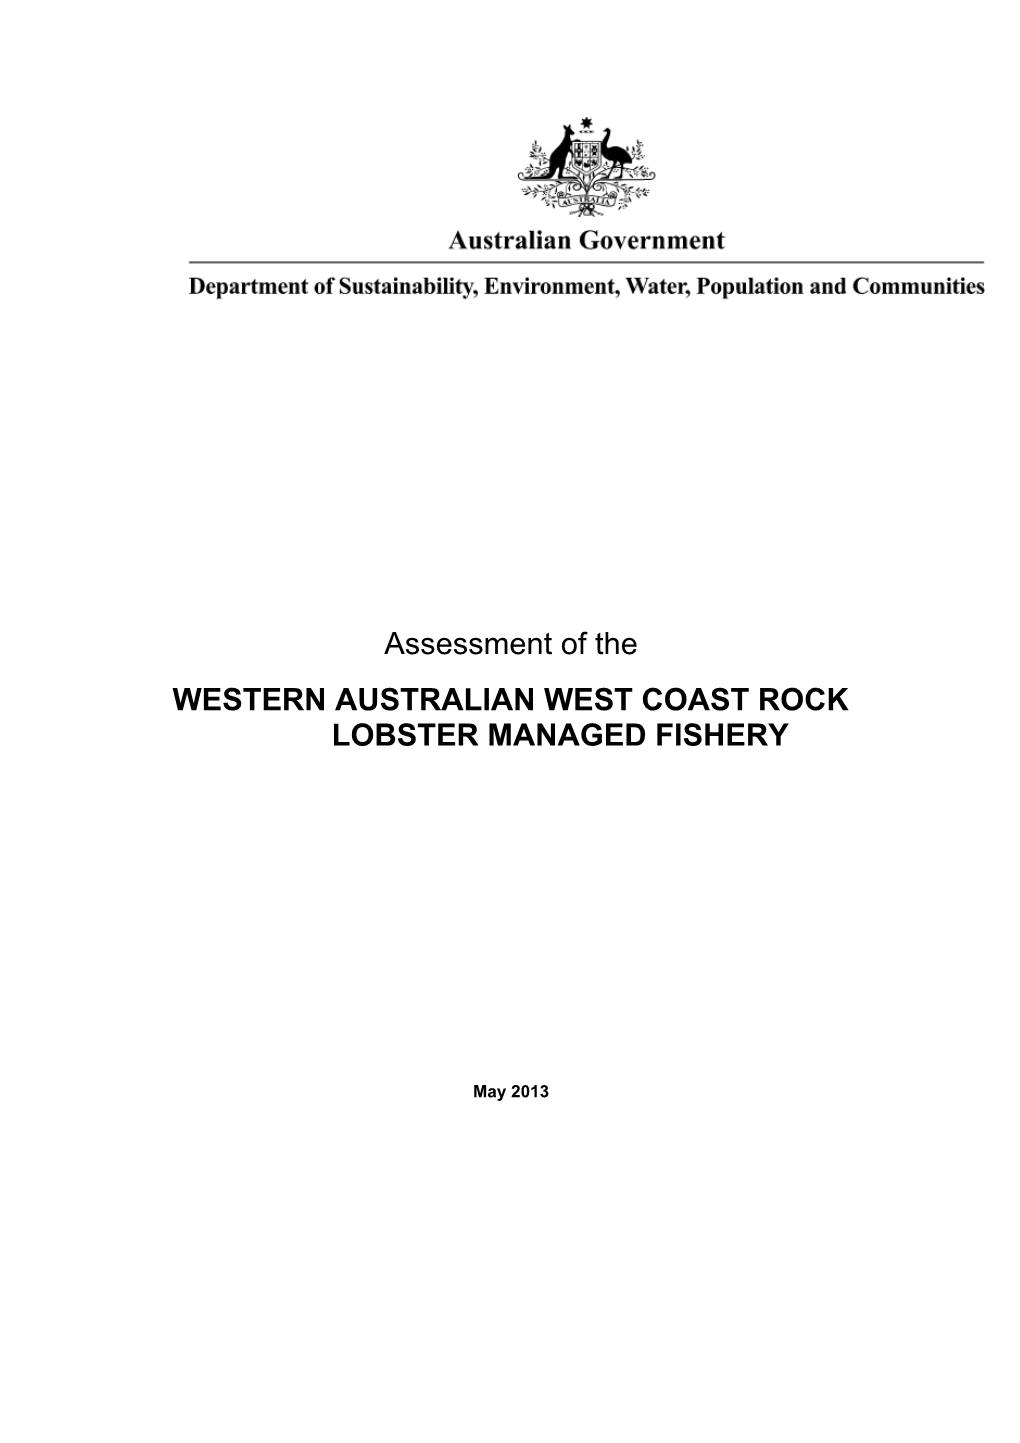 Assessment of the Western Australian West Coast Rock Lobster Managed Fishery - 2013